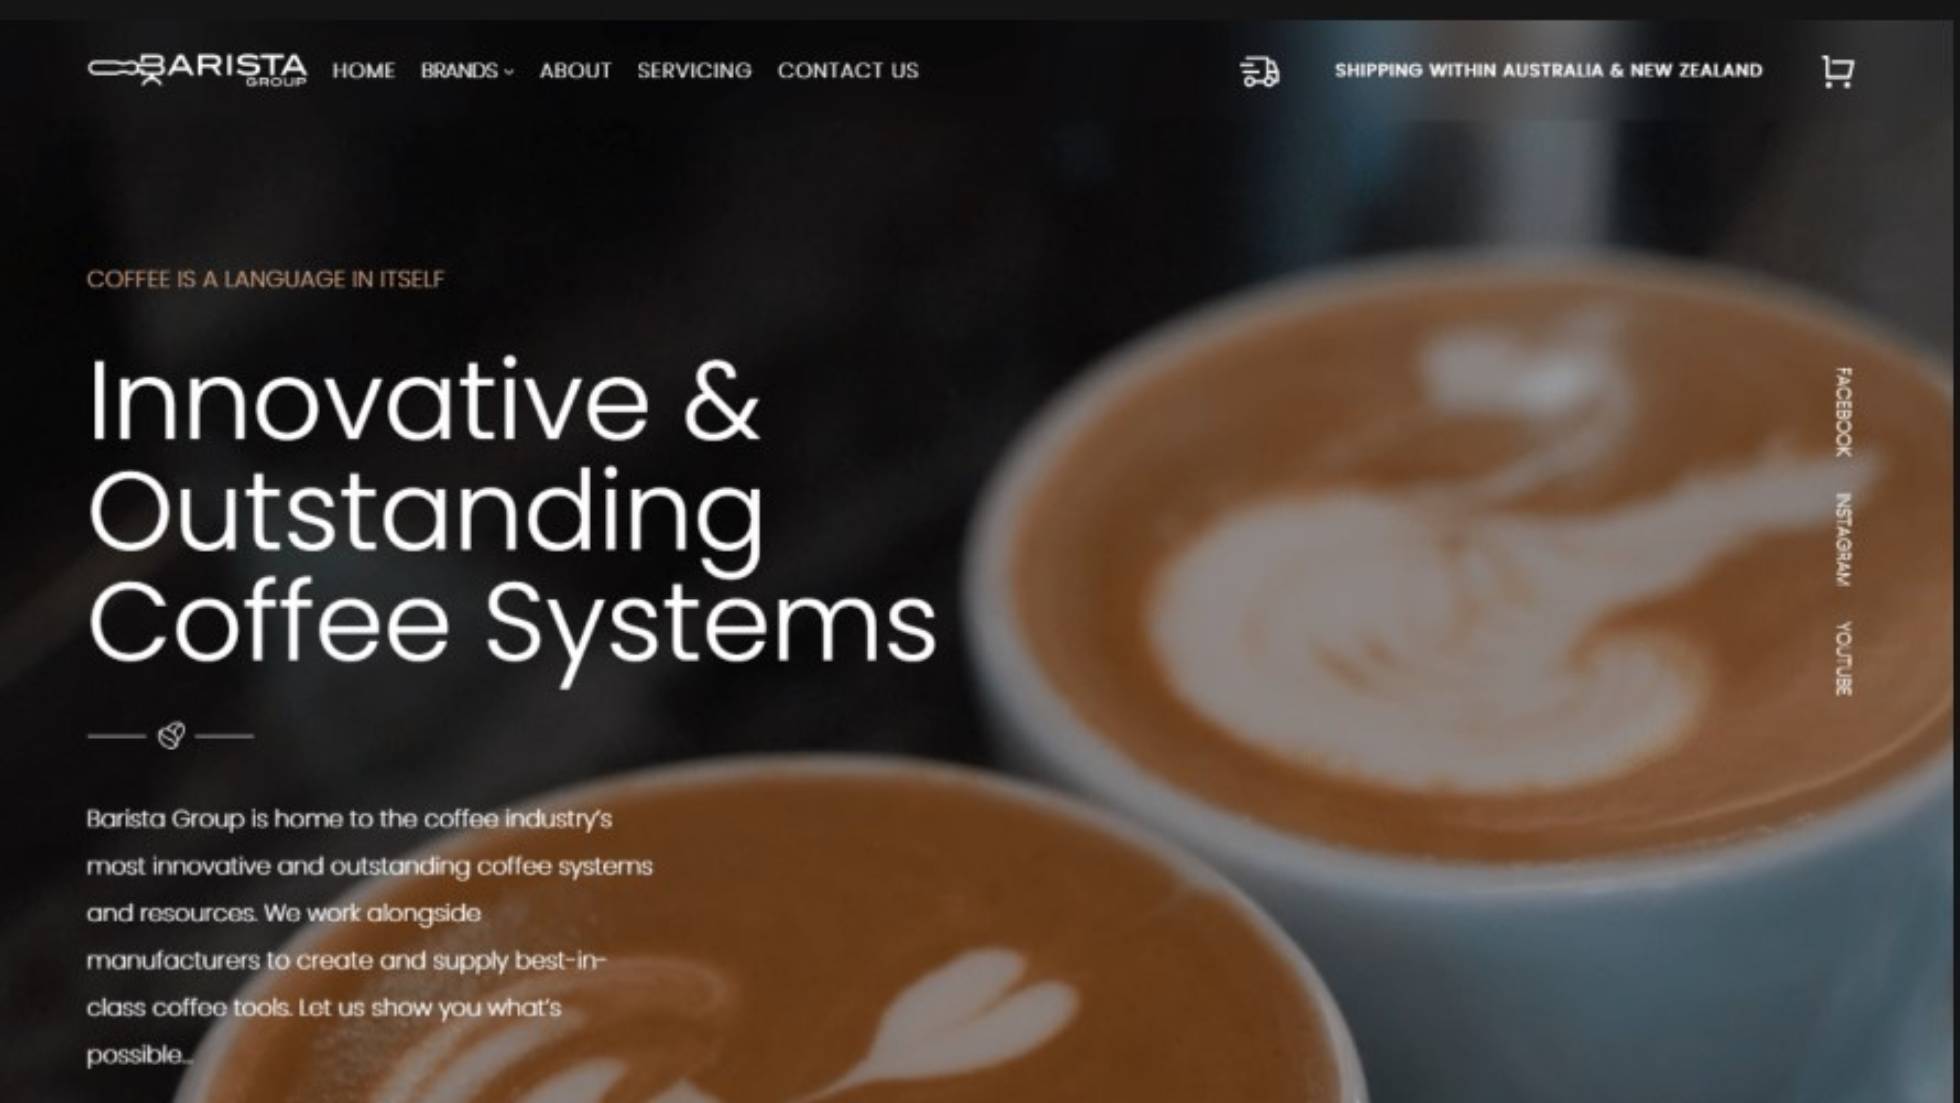 A Photo of the Creato's Ecommerce web design case study of Barista website homepage featuring two cups of coffee with latte art and a slogan about innovative and outstanding coffee systems.